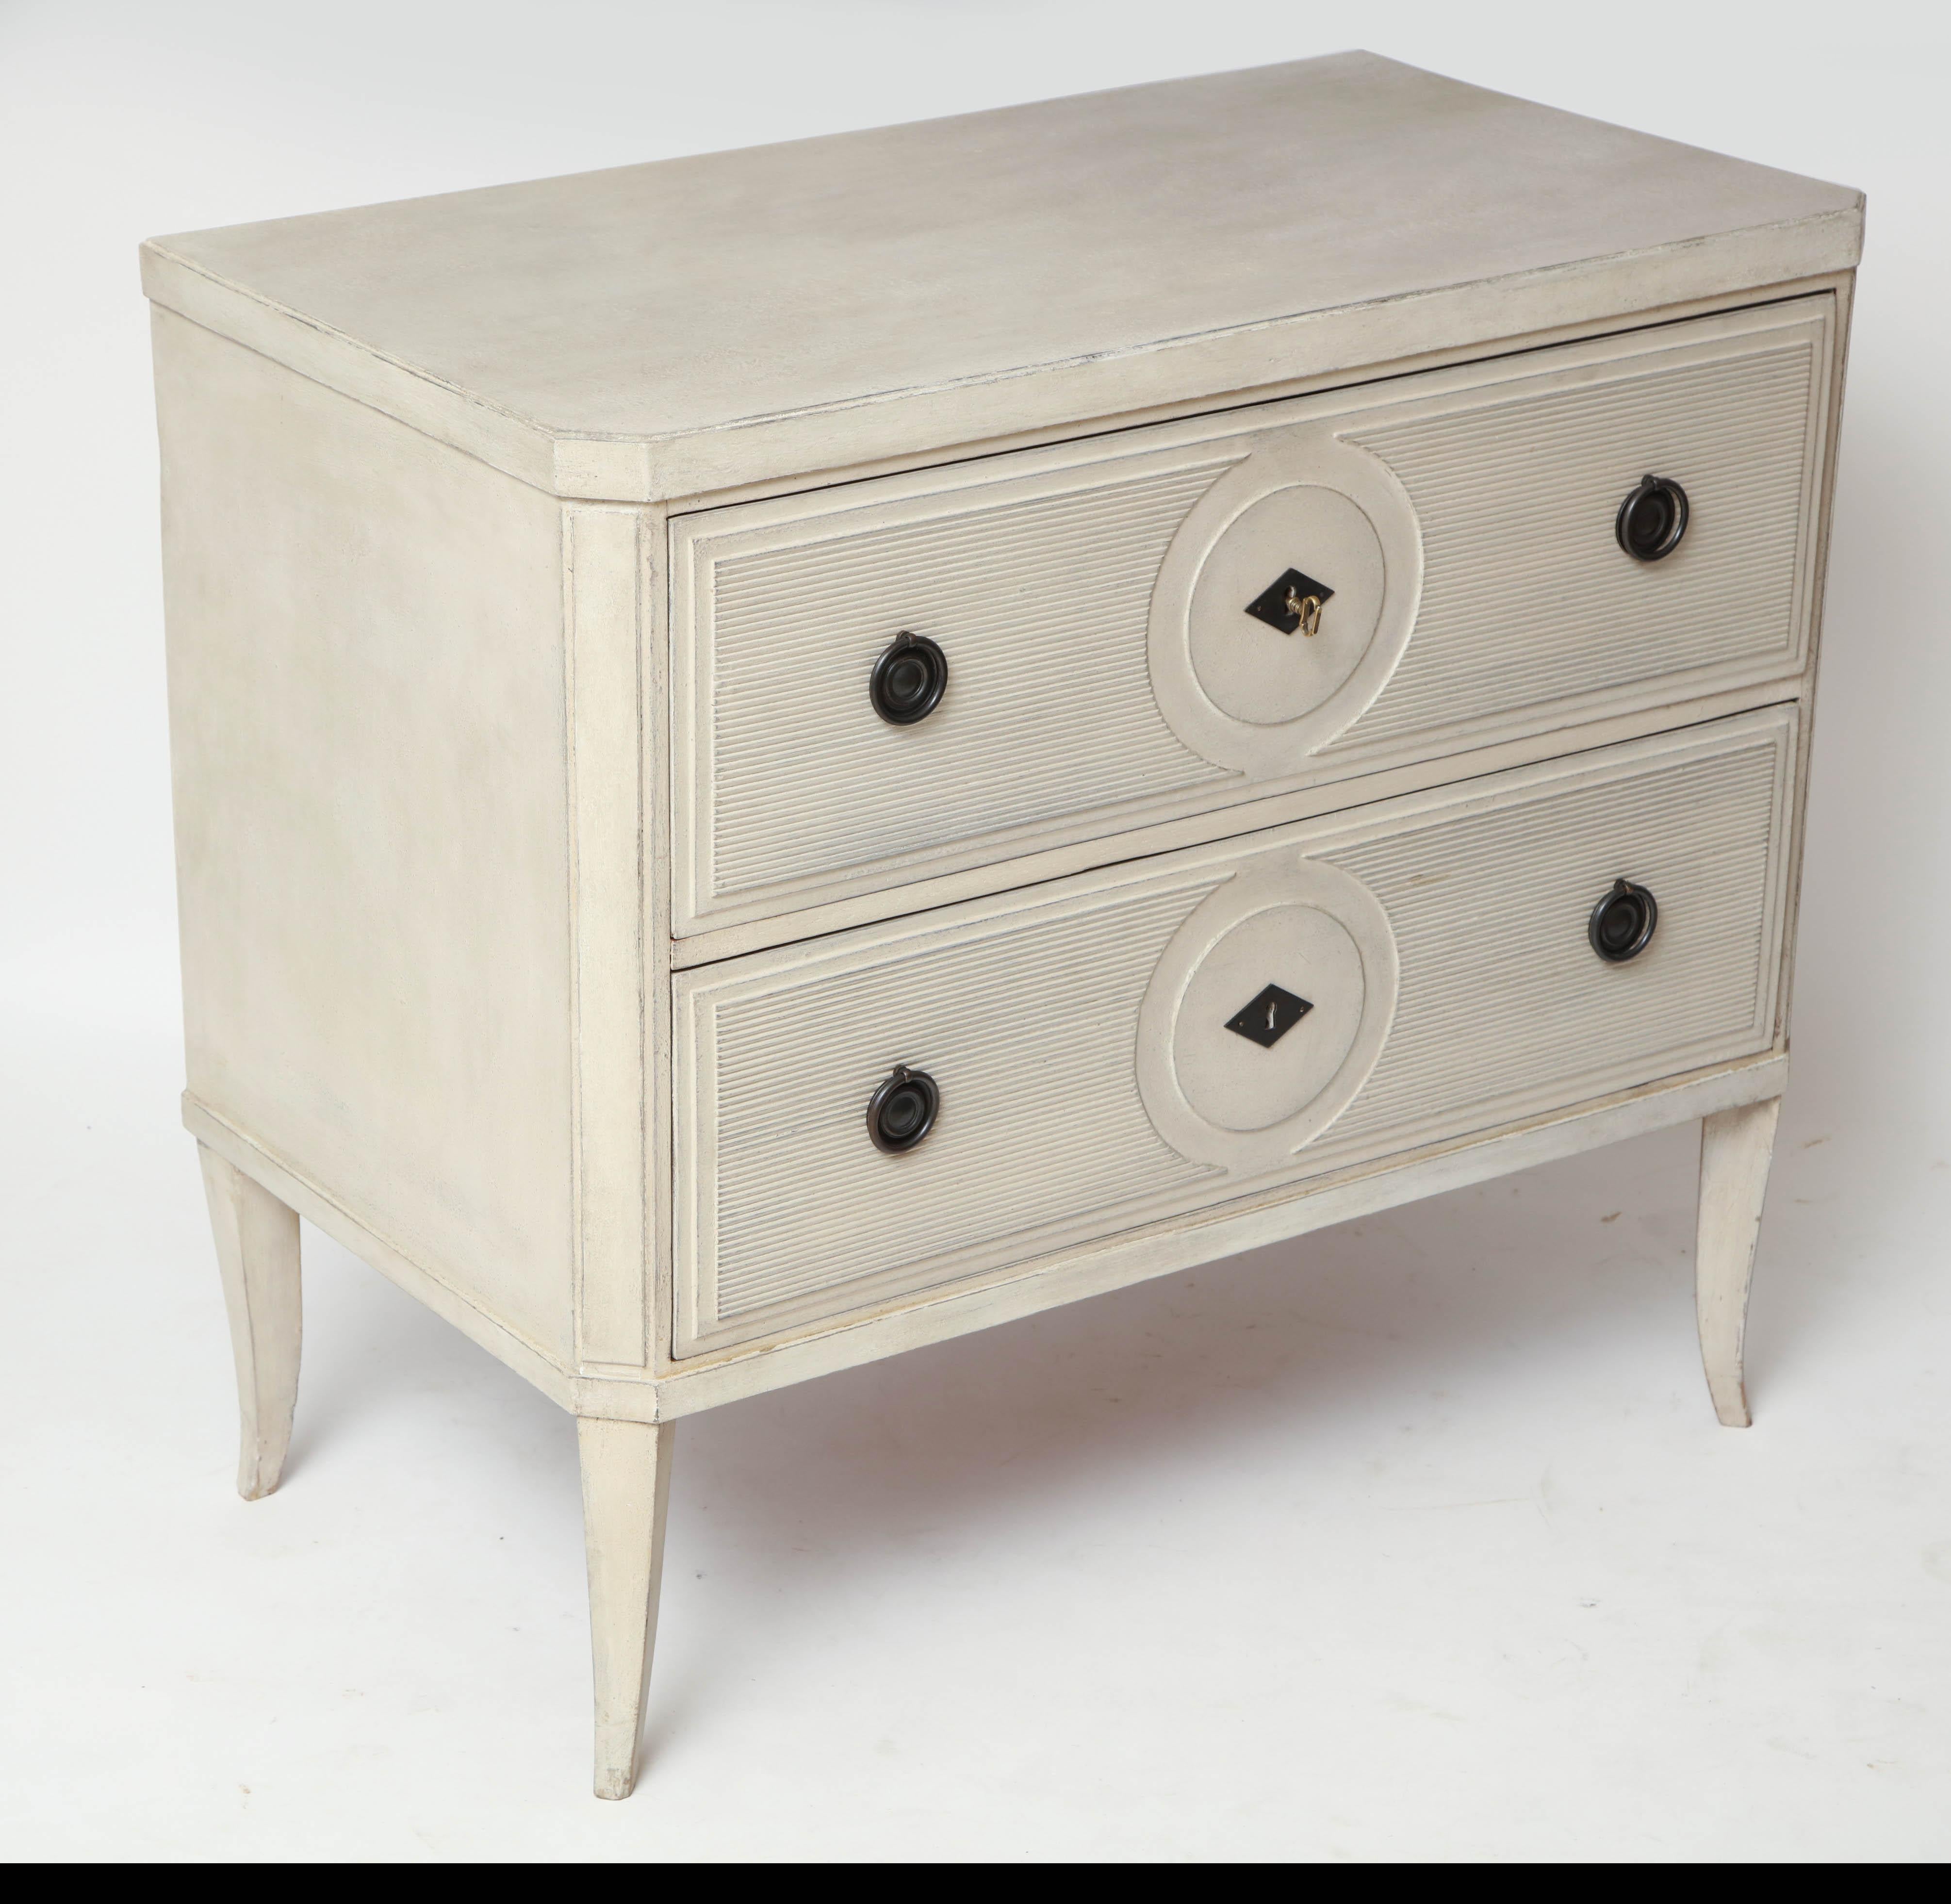 Hand-painted white two-drawer commode with ribbed detailing, Belgium, circa 1950

Overall Dimensions: 38” W, 21” D, 33.5” H

Available to see in our NYC Showroom 
BK Antiques
306 East 61st St. 2nd fl.
New York, NY 10065